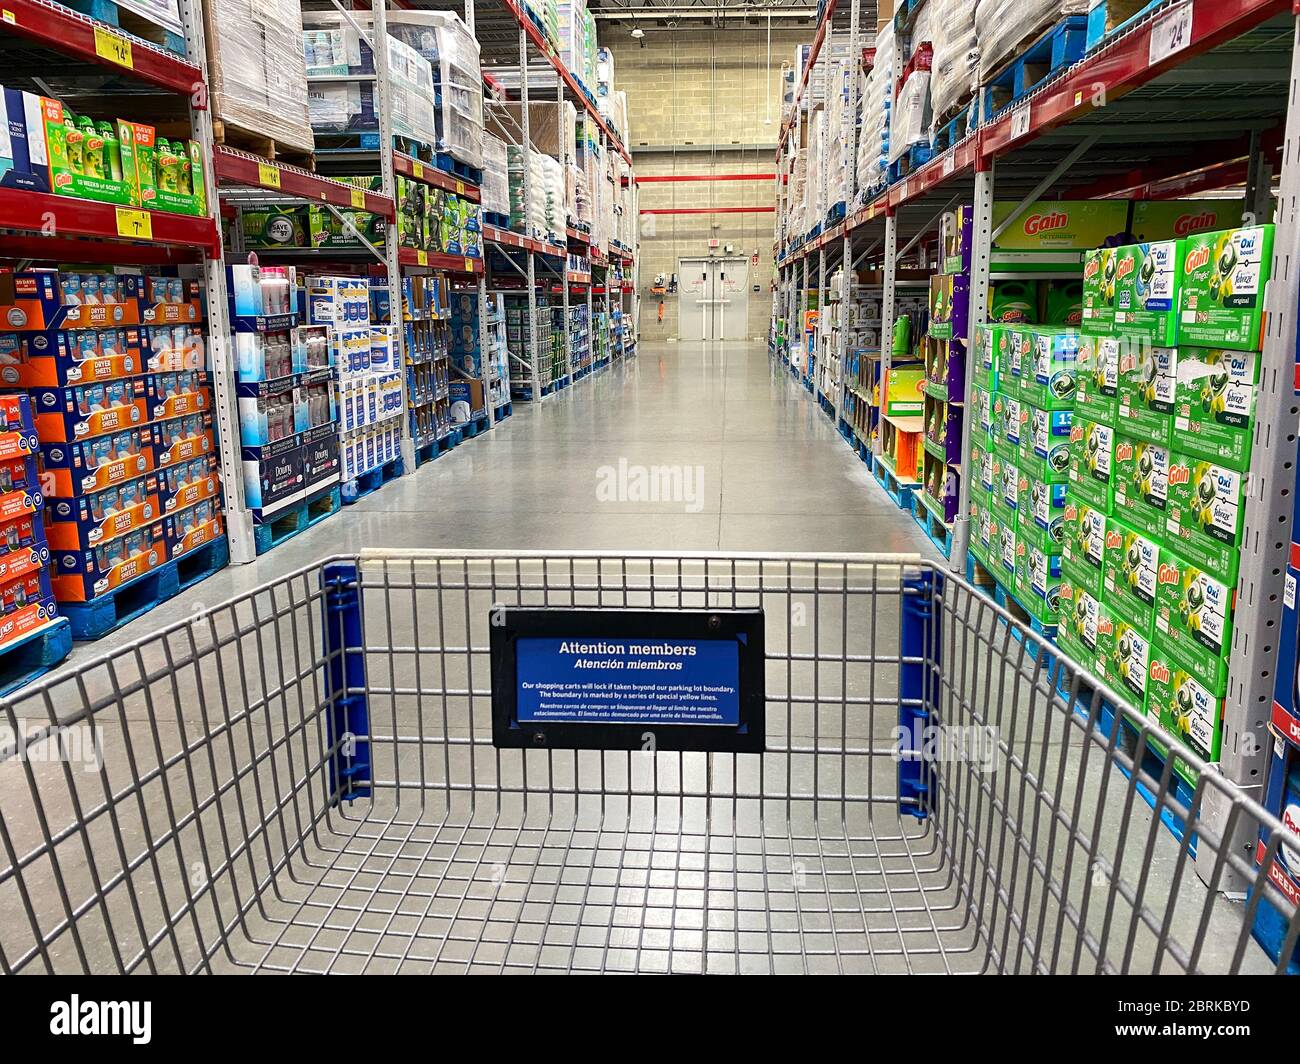 Orlando, FL/USA-2/11/20: The view from a cart of laundry products aisle of  a Sams Club grocery store Stock Photo - Alamy